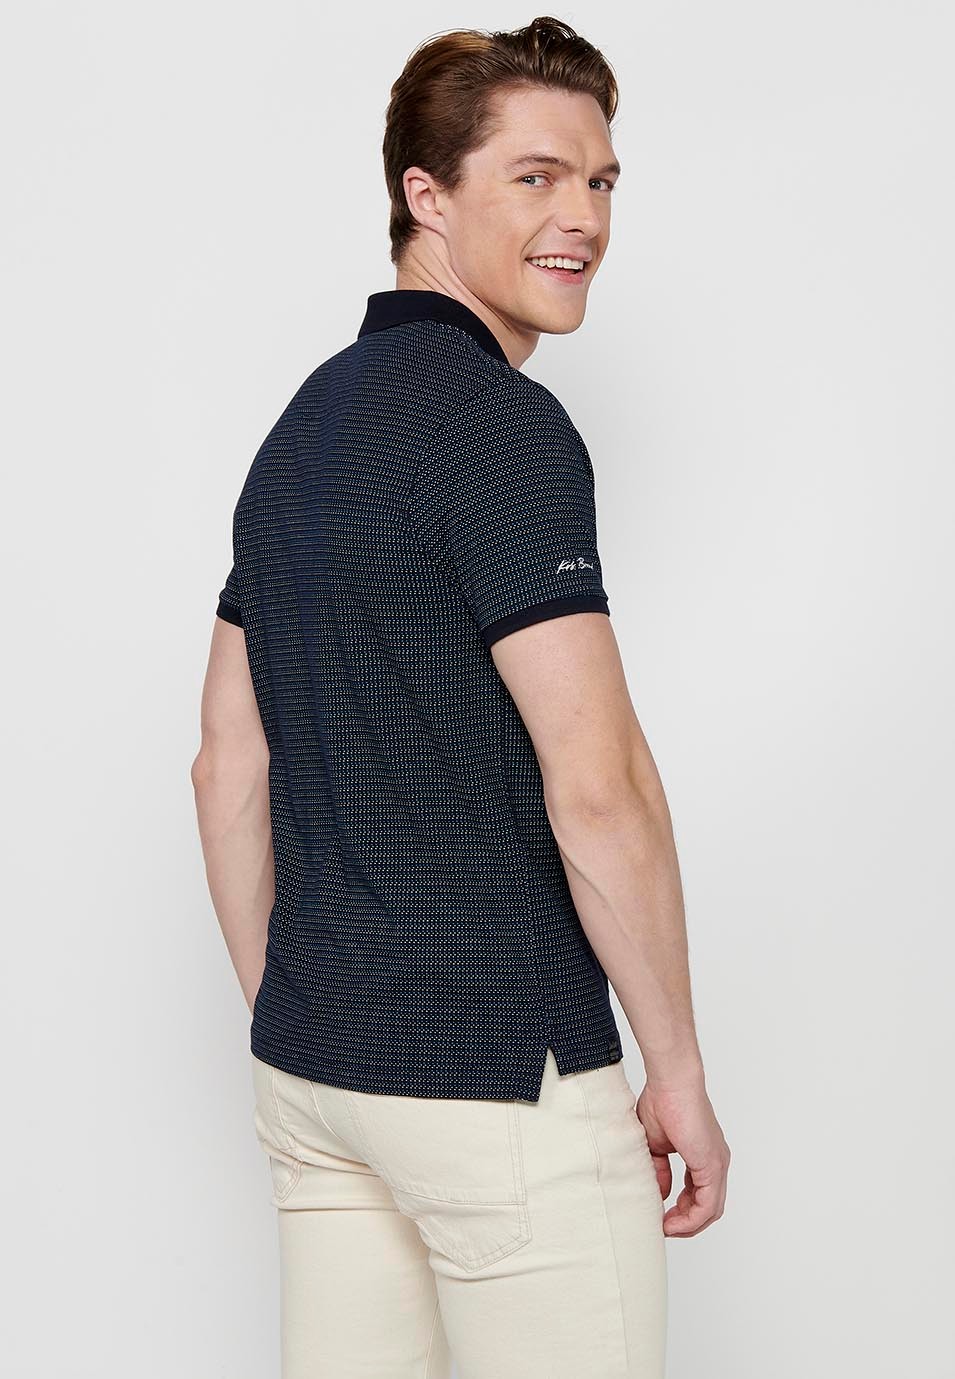 Short-sleeved cotton polo shirt with ribbed finish and buttoned shirt collar with printed fabric and finished with side slits by Navy for Men